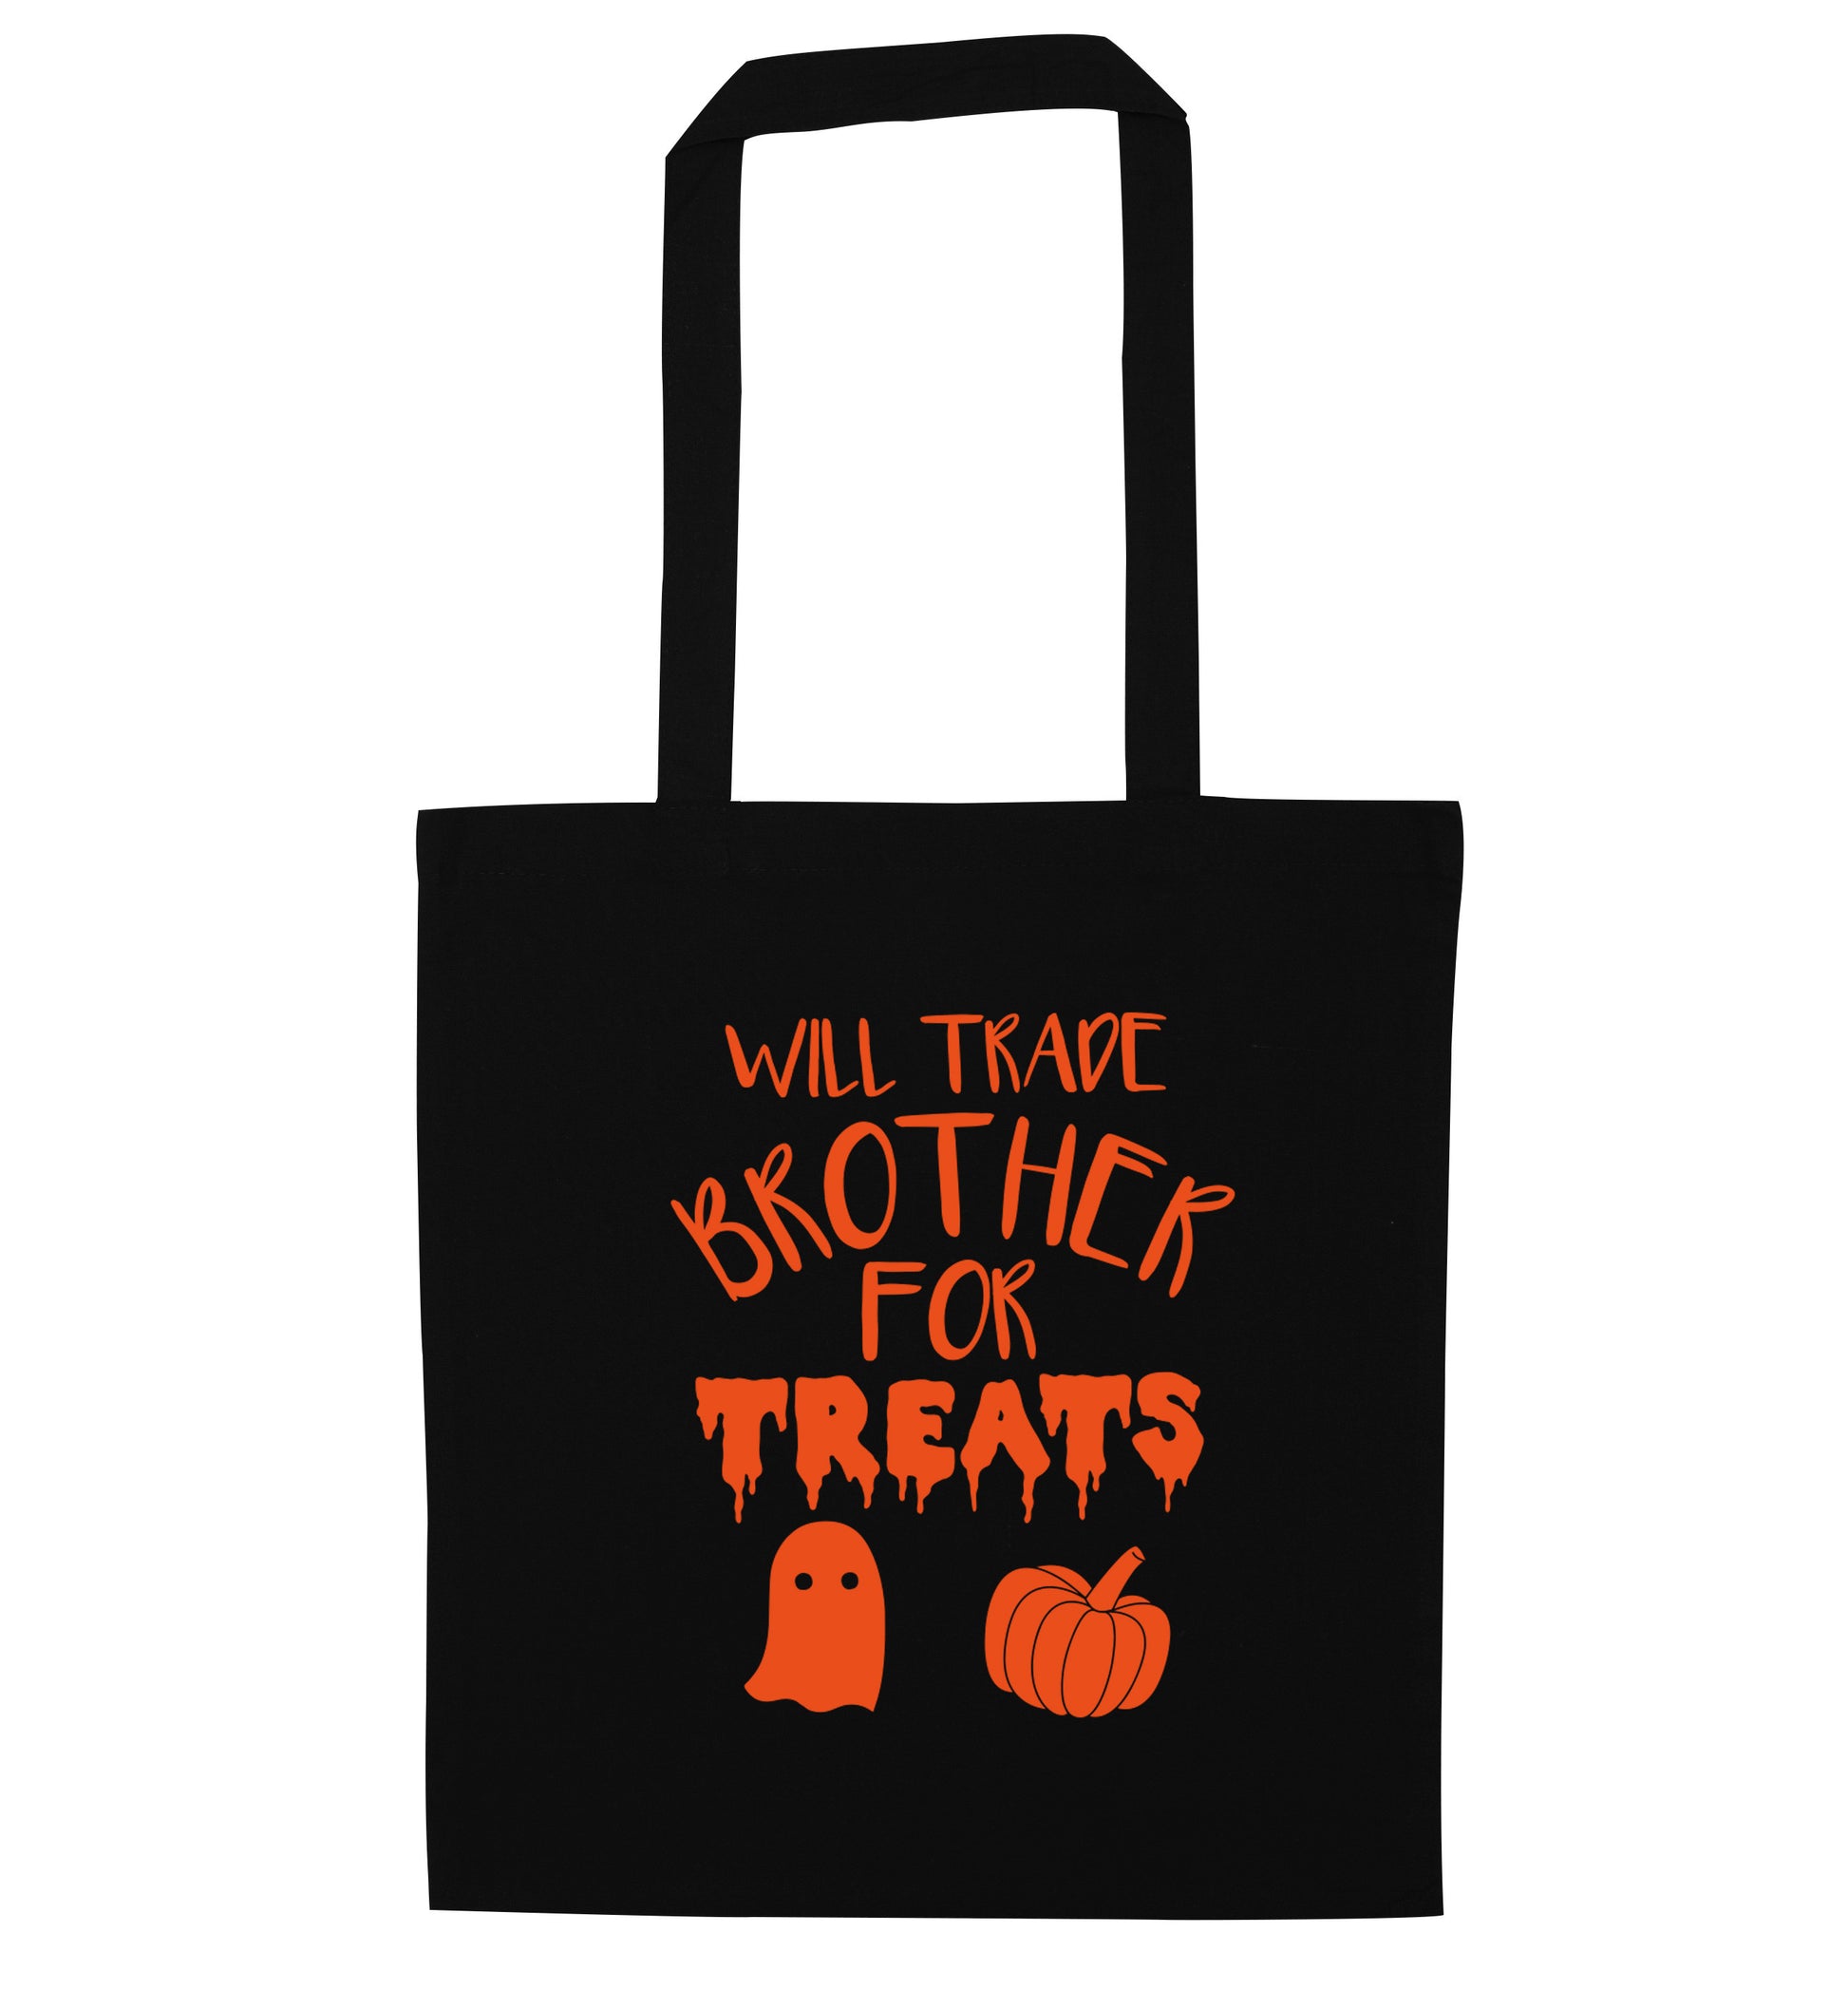 Will trade brother for treats black tote bag